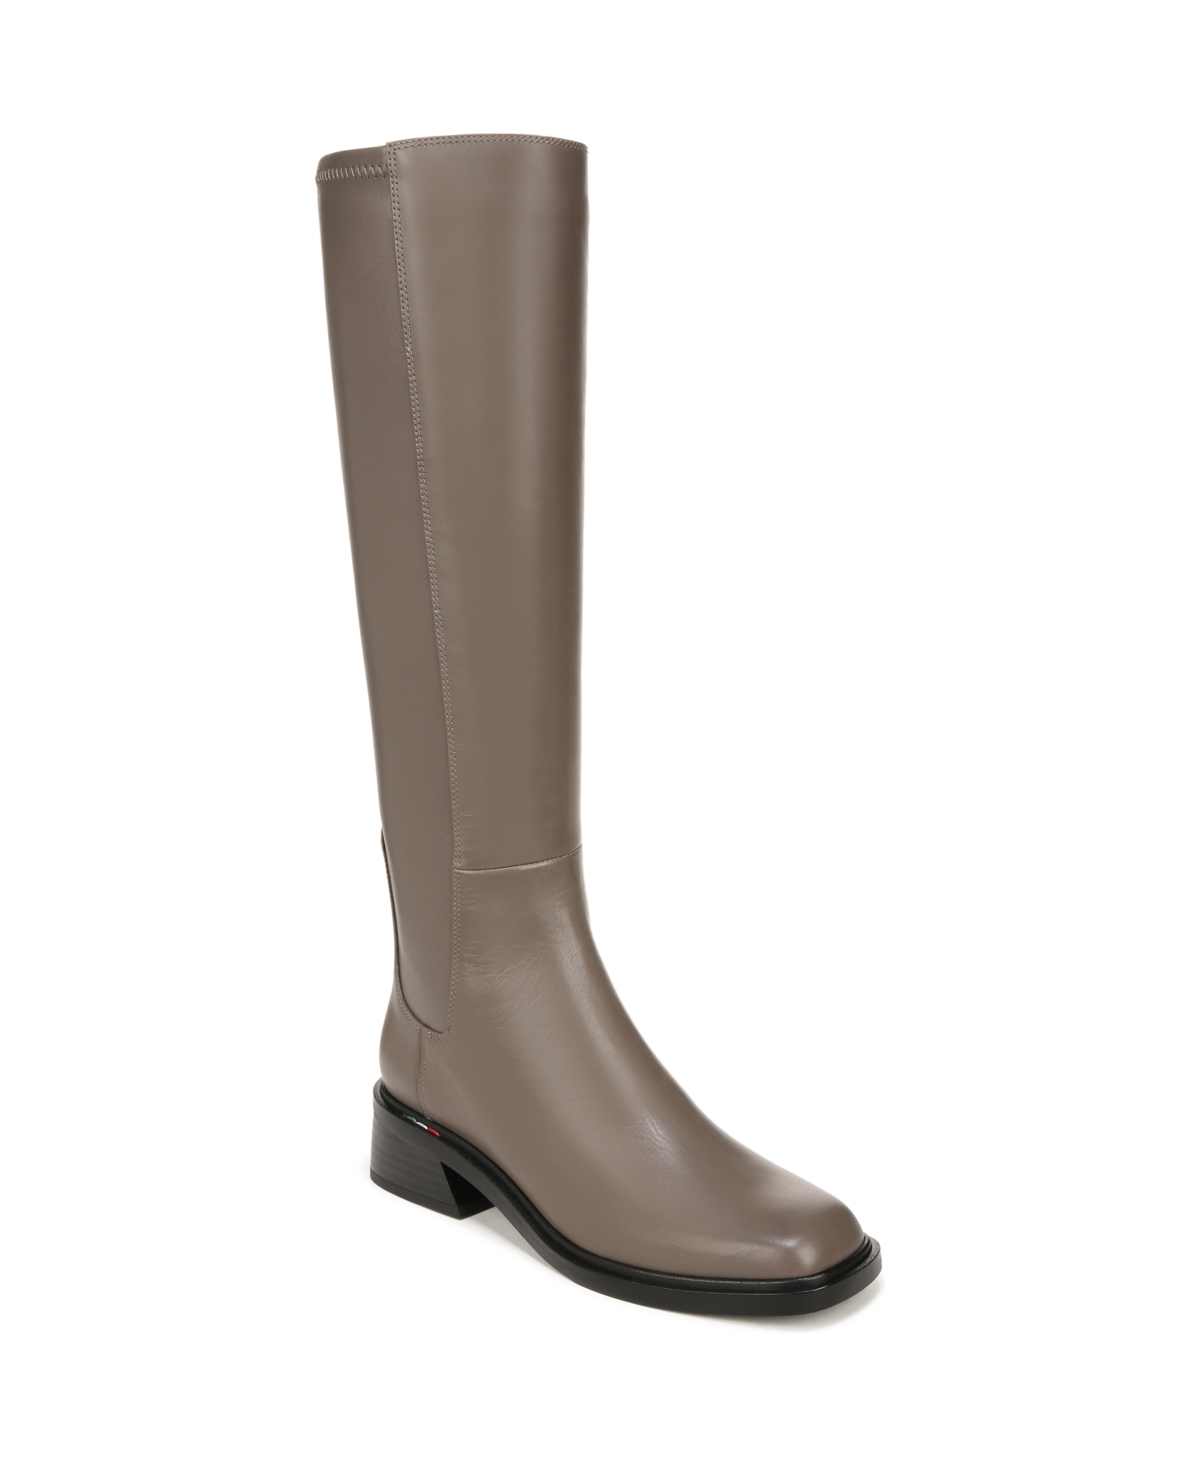 Giselle Square Toe Knee High Boots - Shadow Grey Leather